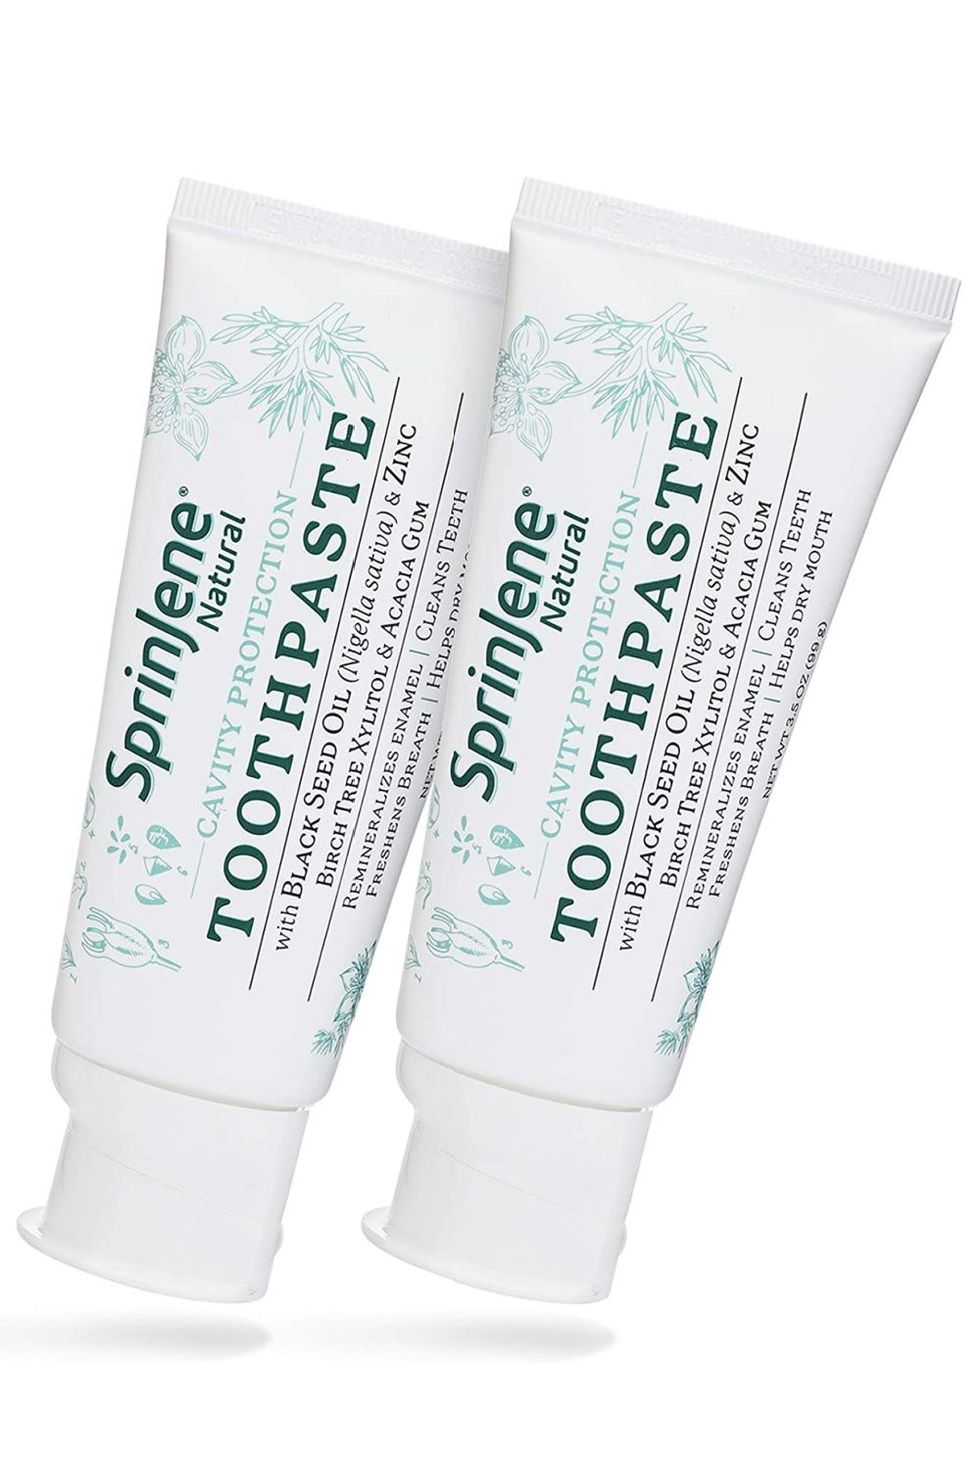 SprinJene Natural Cavity Protection Toothpaste with Fluoride